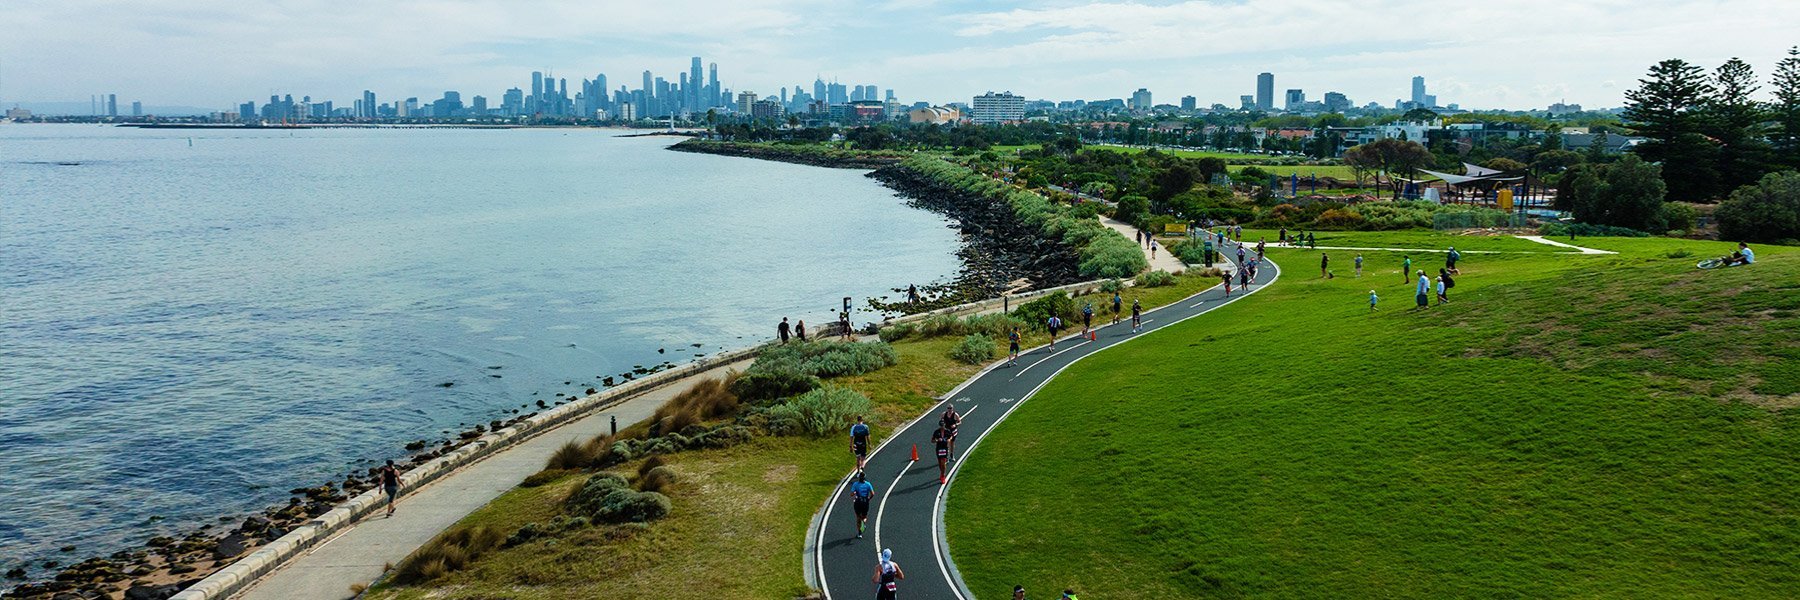 St Kilda, Melbourne - City racing at its best